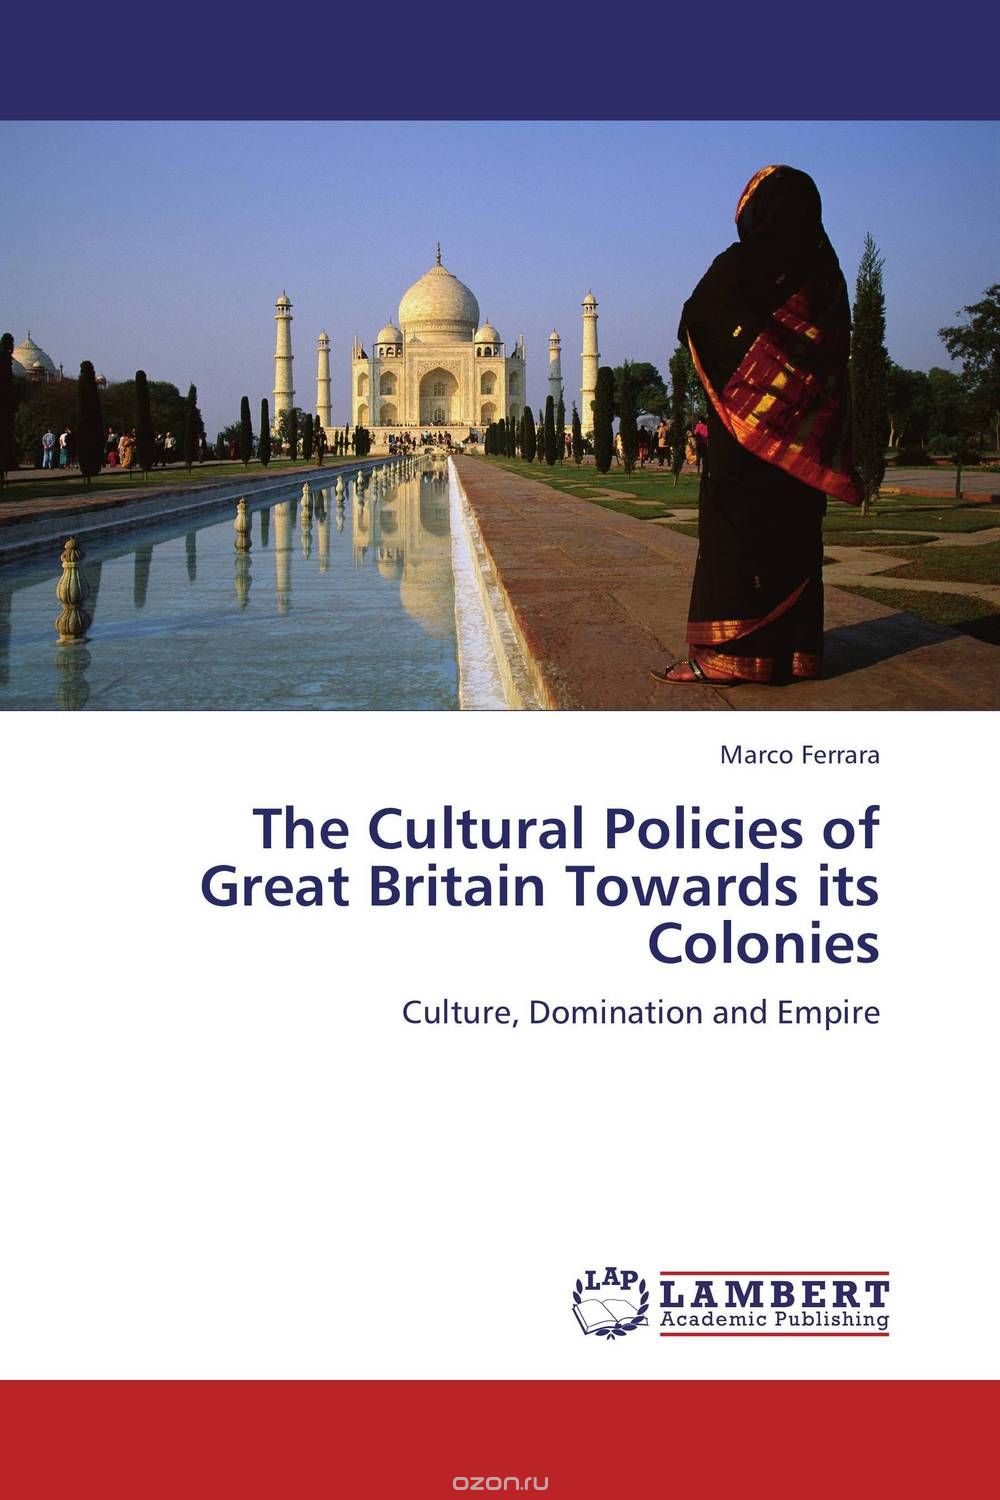 Скачать книгу "The Cultural Policies of Great Britain Towards its Colonies"